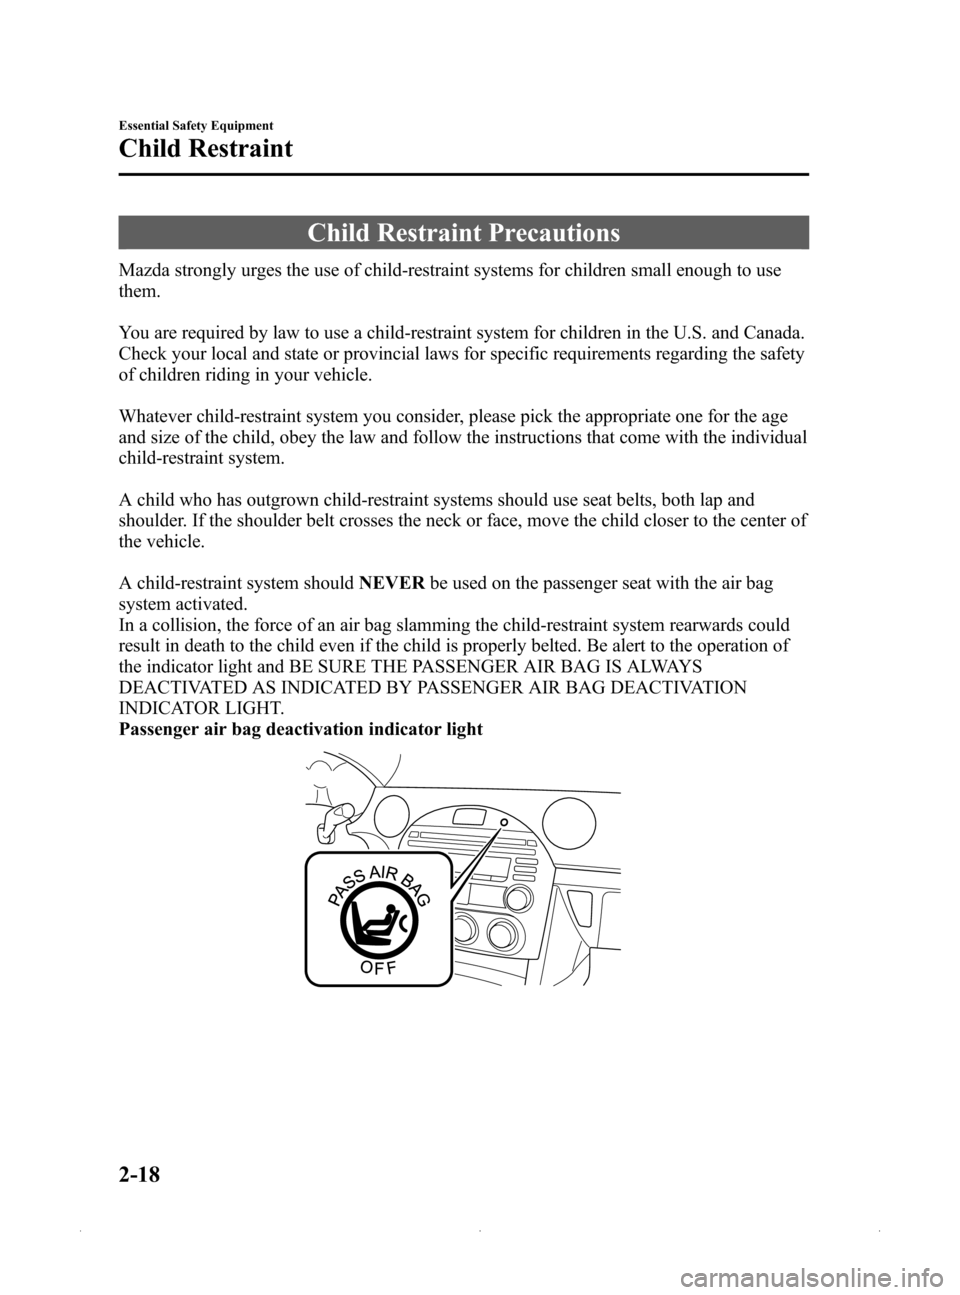 MAZDA MODEL MX-5 2015   (in English) Owners Manual Black plate (30,1)
Child Restraint Precautions
Mazda strongly urges the use of child-restraint systems for children small enough to use
them.
You are required by law to use a child-restraint system fo